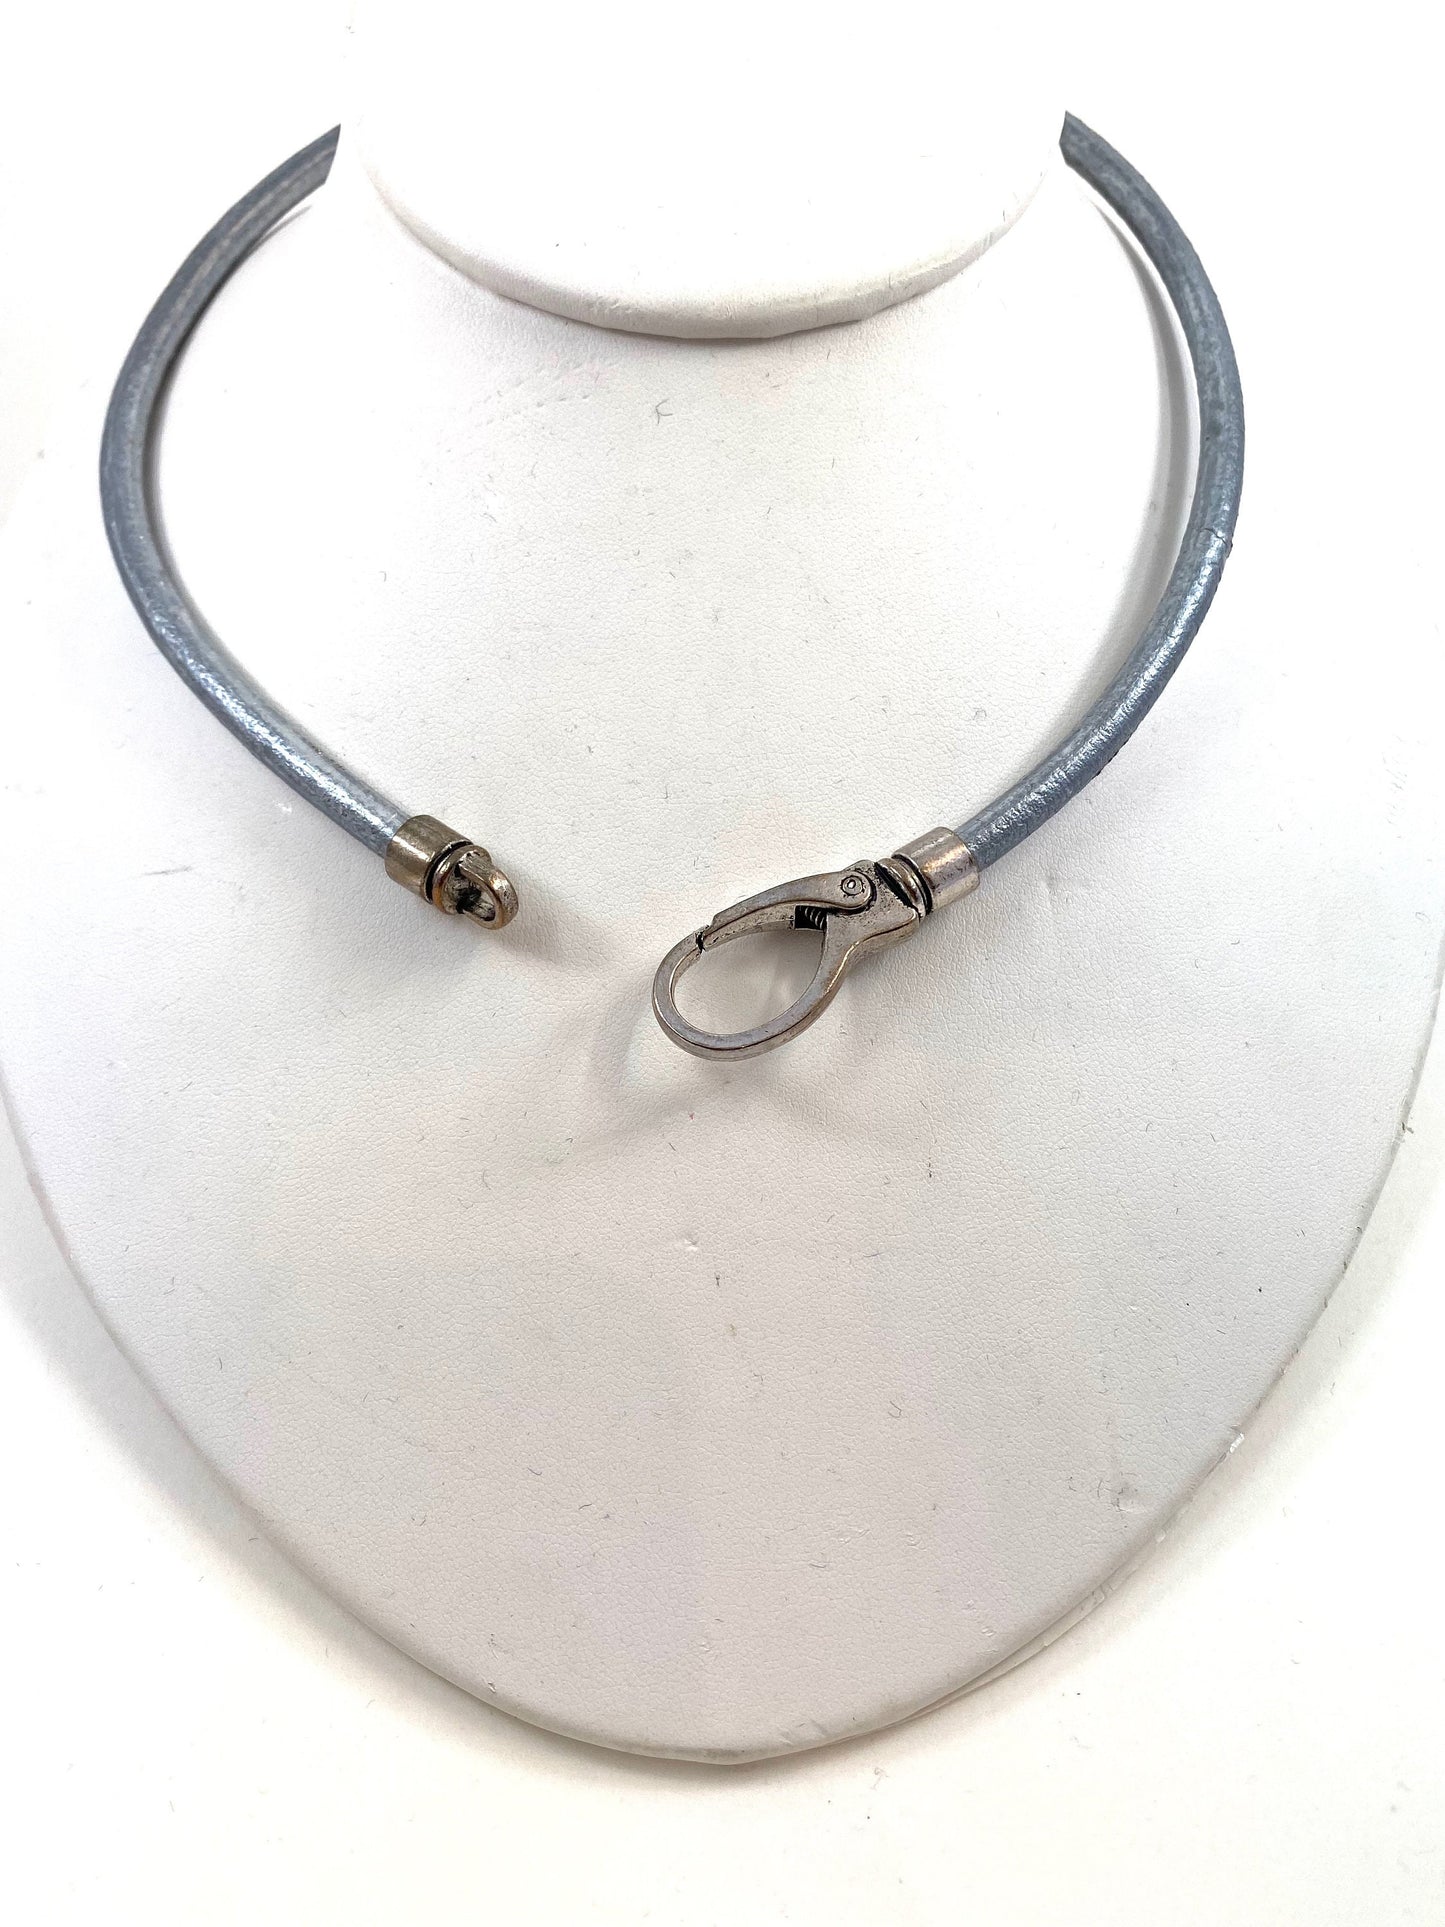 Leather Necklace. Silver-gray Italian leather choker necklace fashioned with a center silver large lobster and loop clasp. Leather is soft.